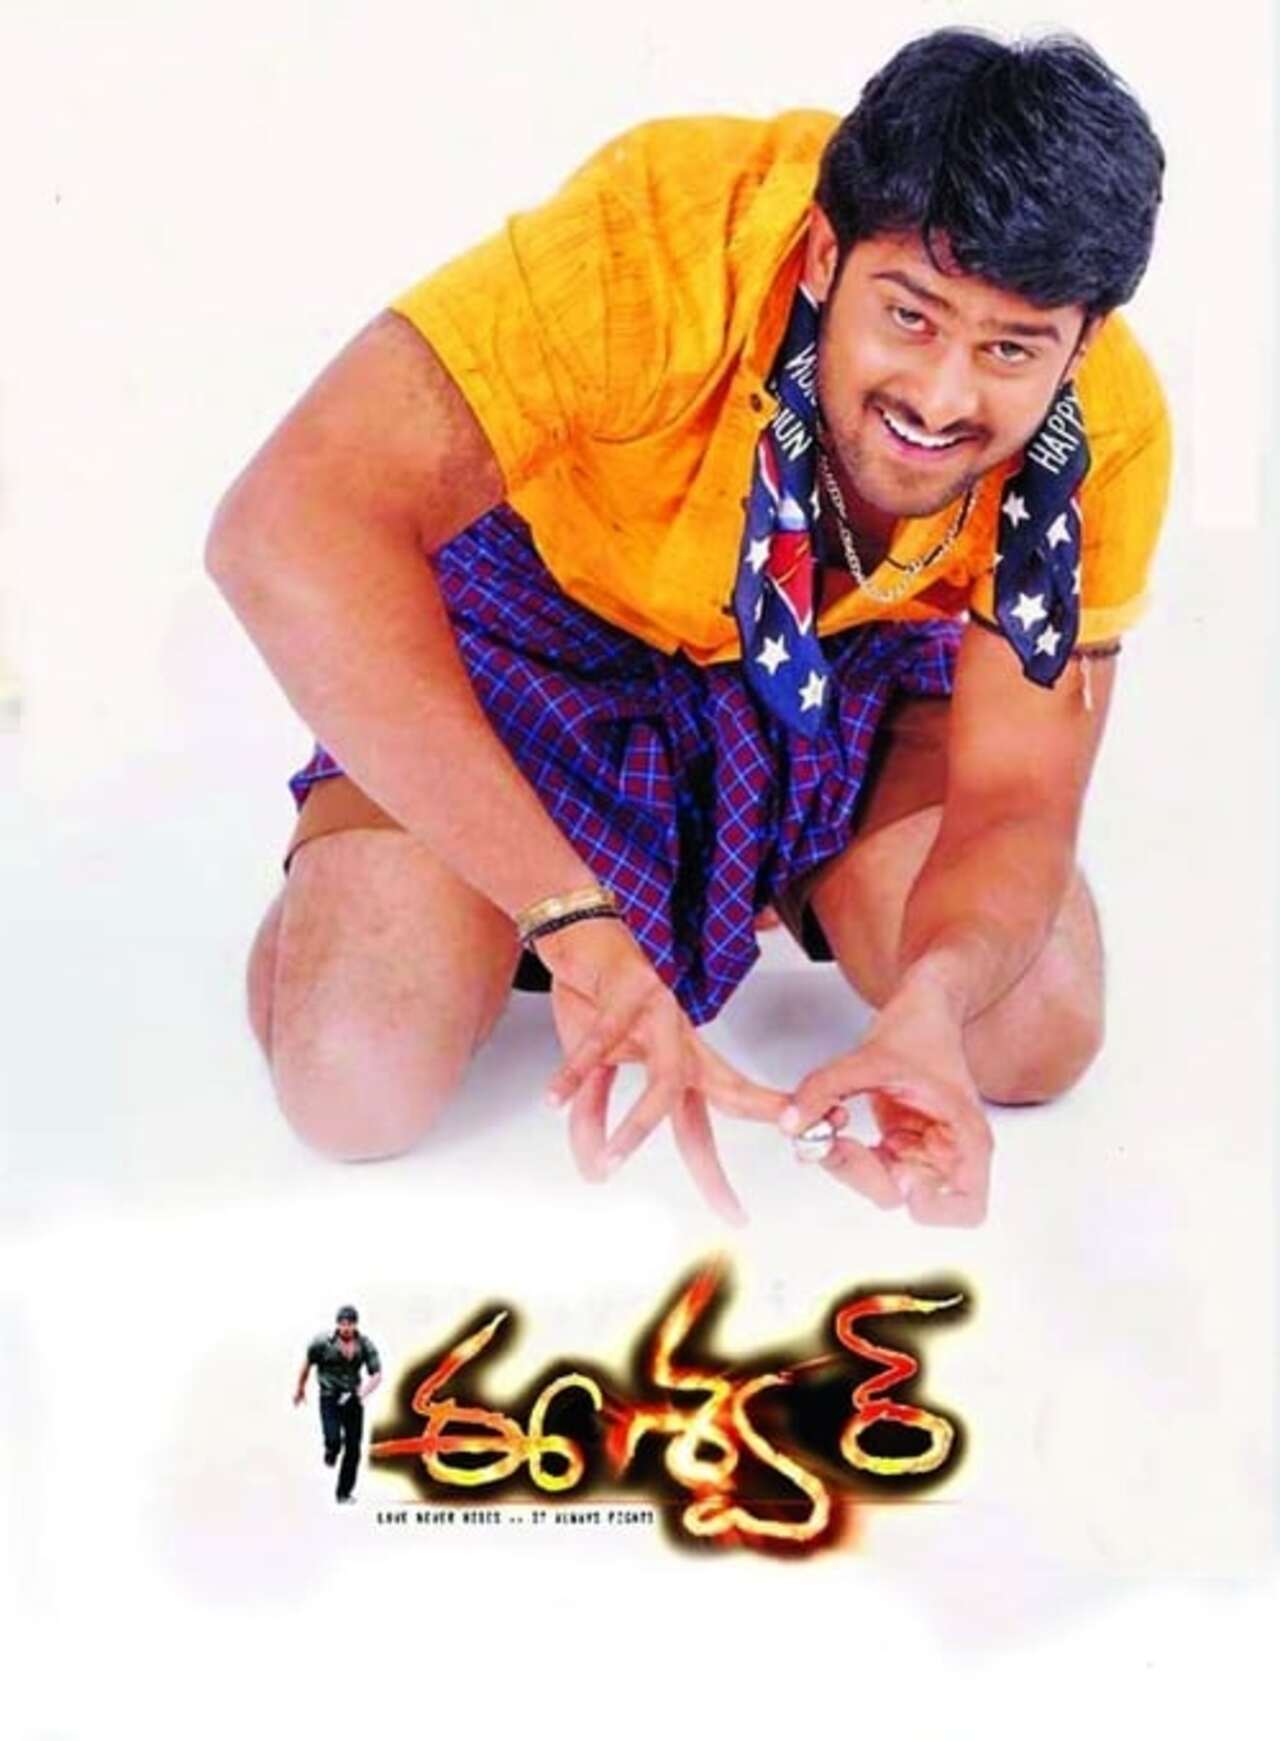 Prabhas made his acting debut with a pleasant role in the Telugu film Eeswar in 2021